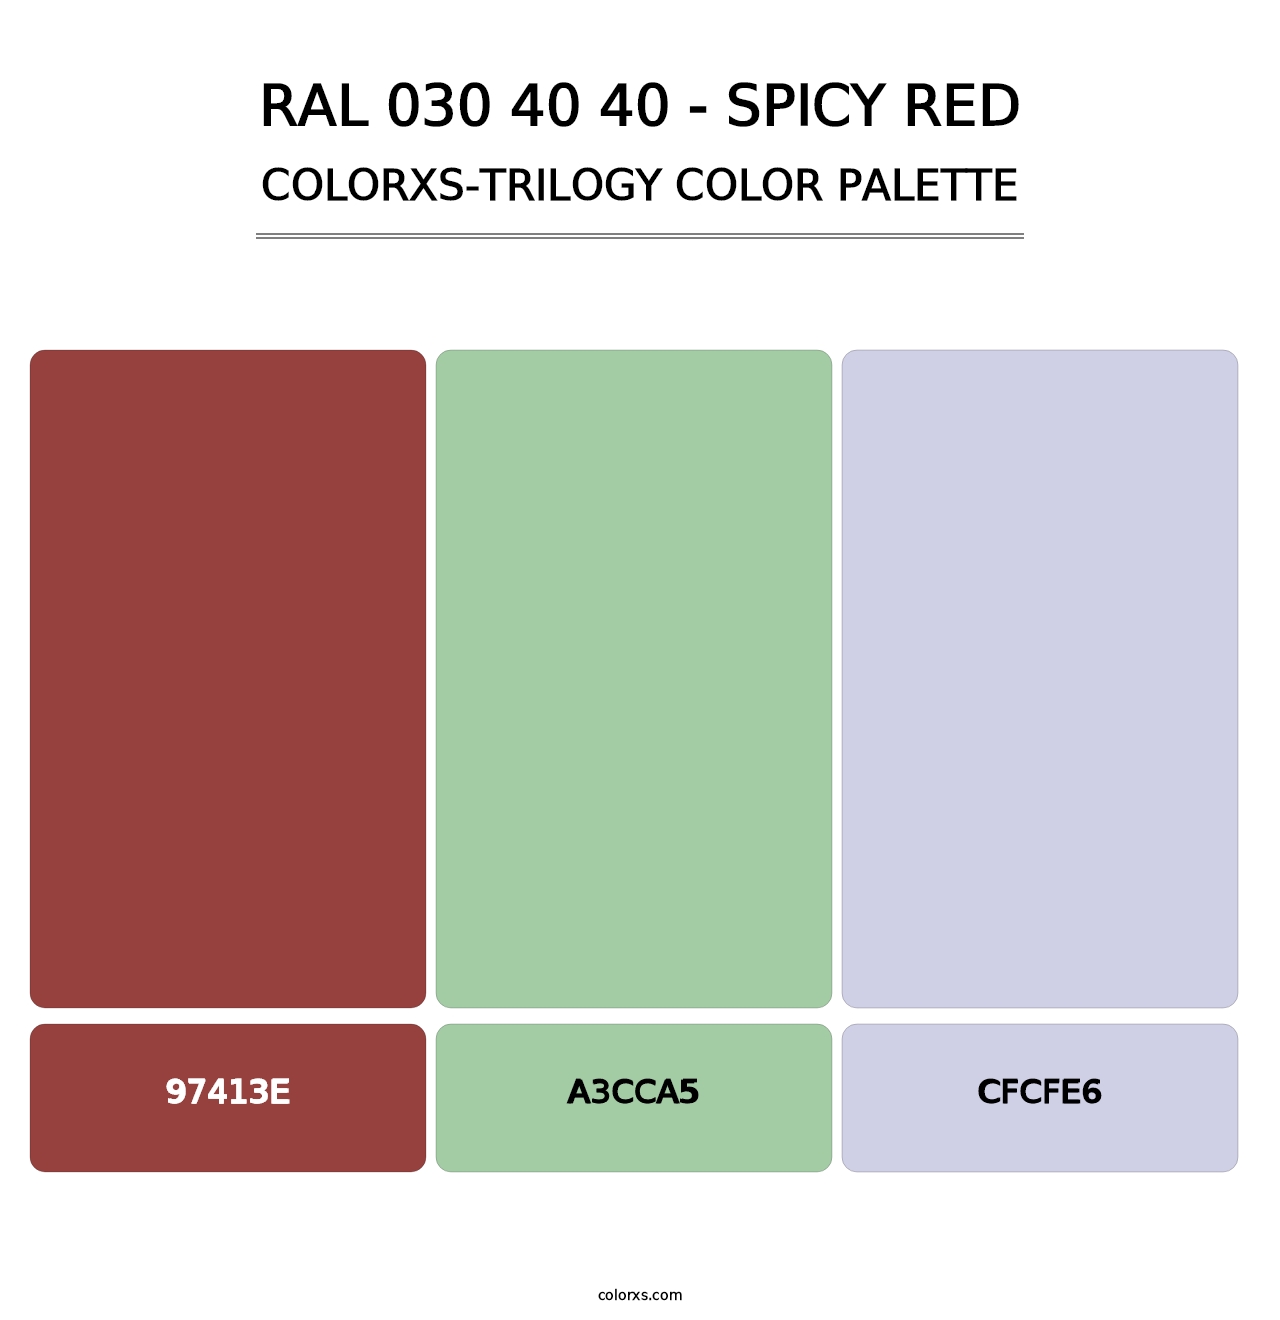 RAL 030 40 40 - Spicy Red - Colorxs Trilogy Palette